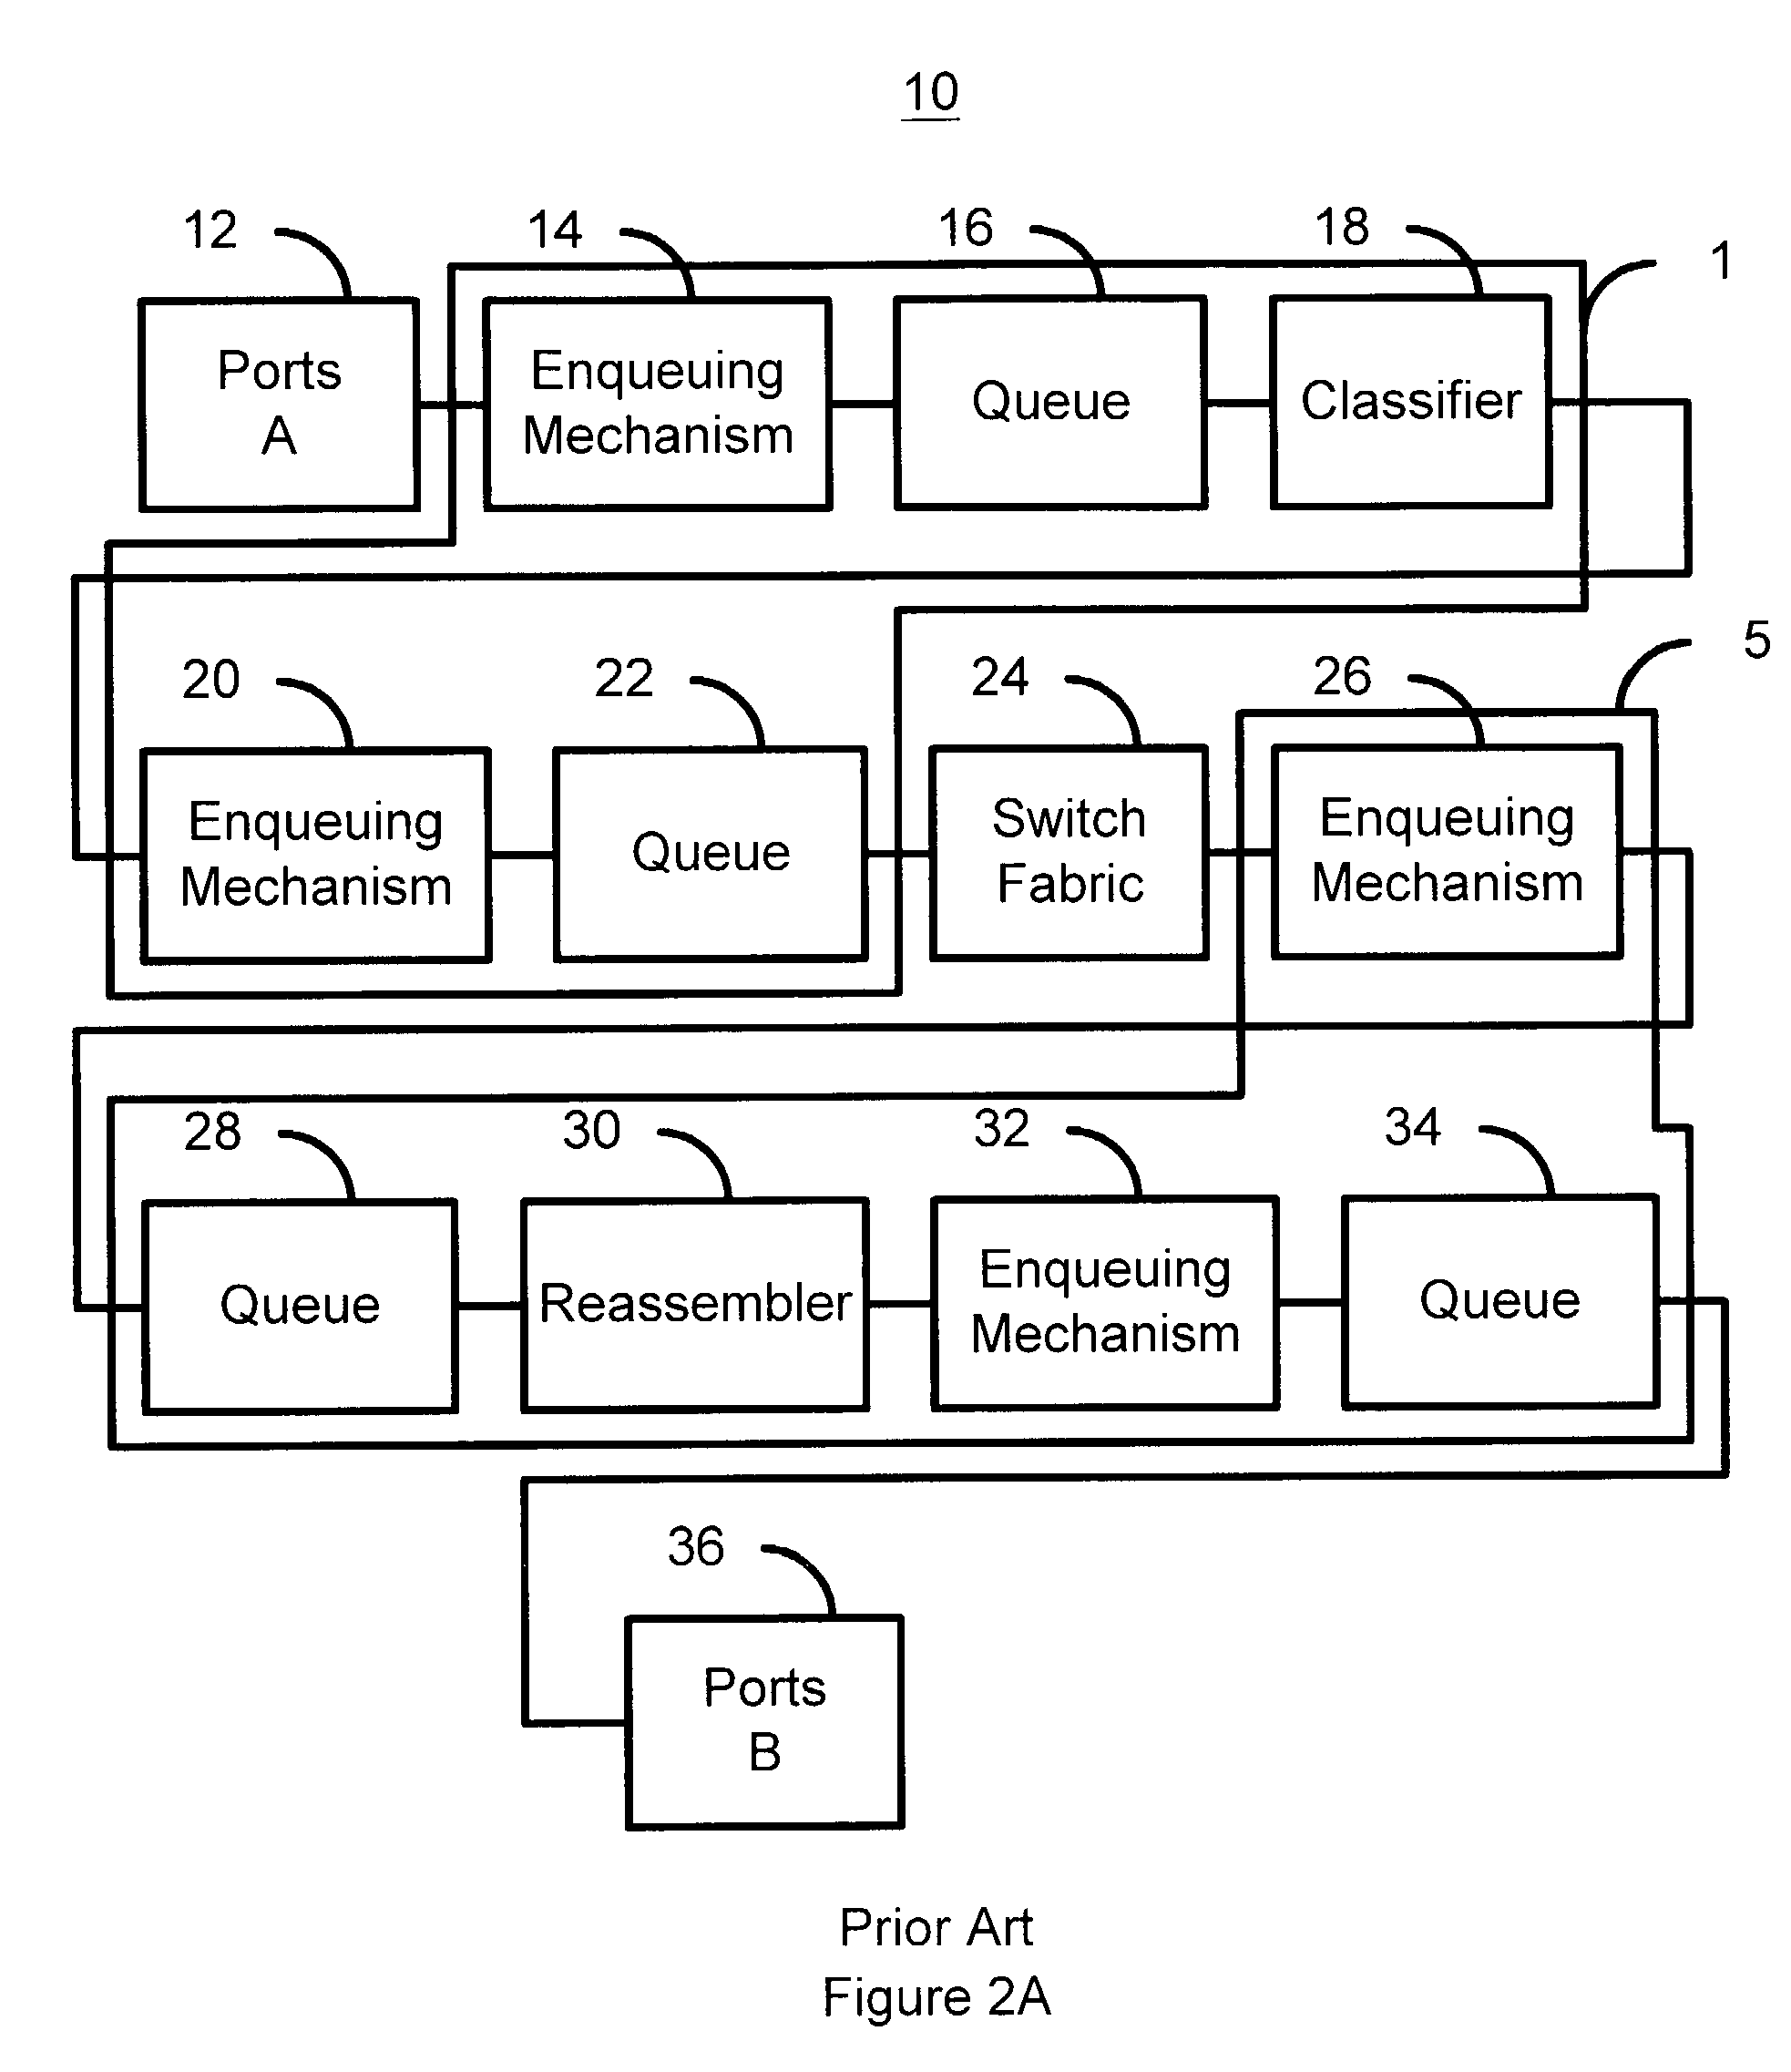 Method for managing of denial of service attacks using bandwidth allocation technology